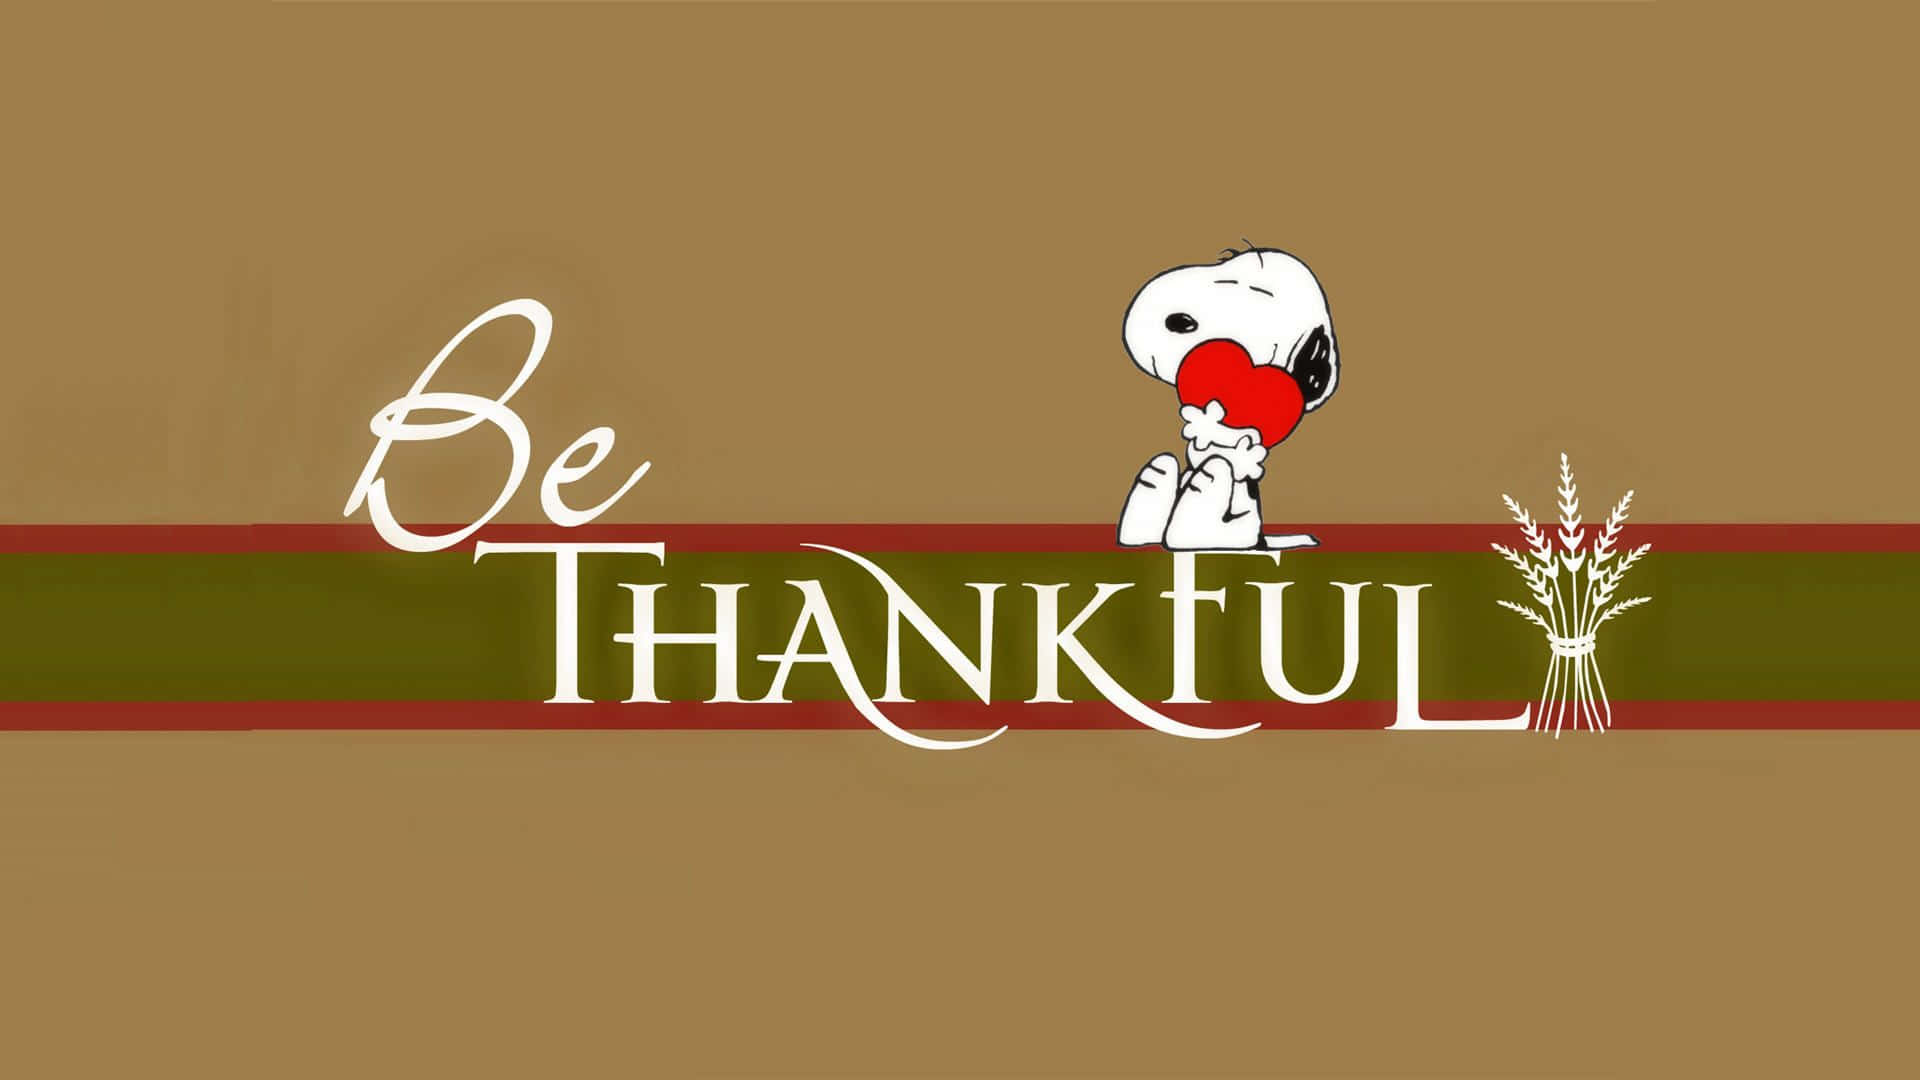 Snoopy Celebrates Thanksgiving With Charlie Brown Background